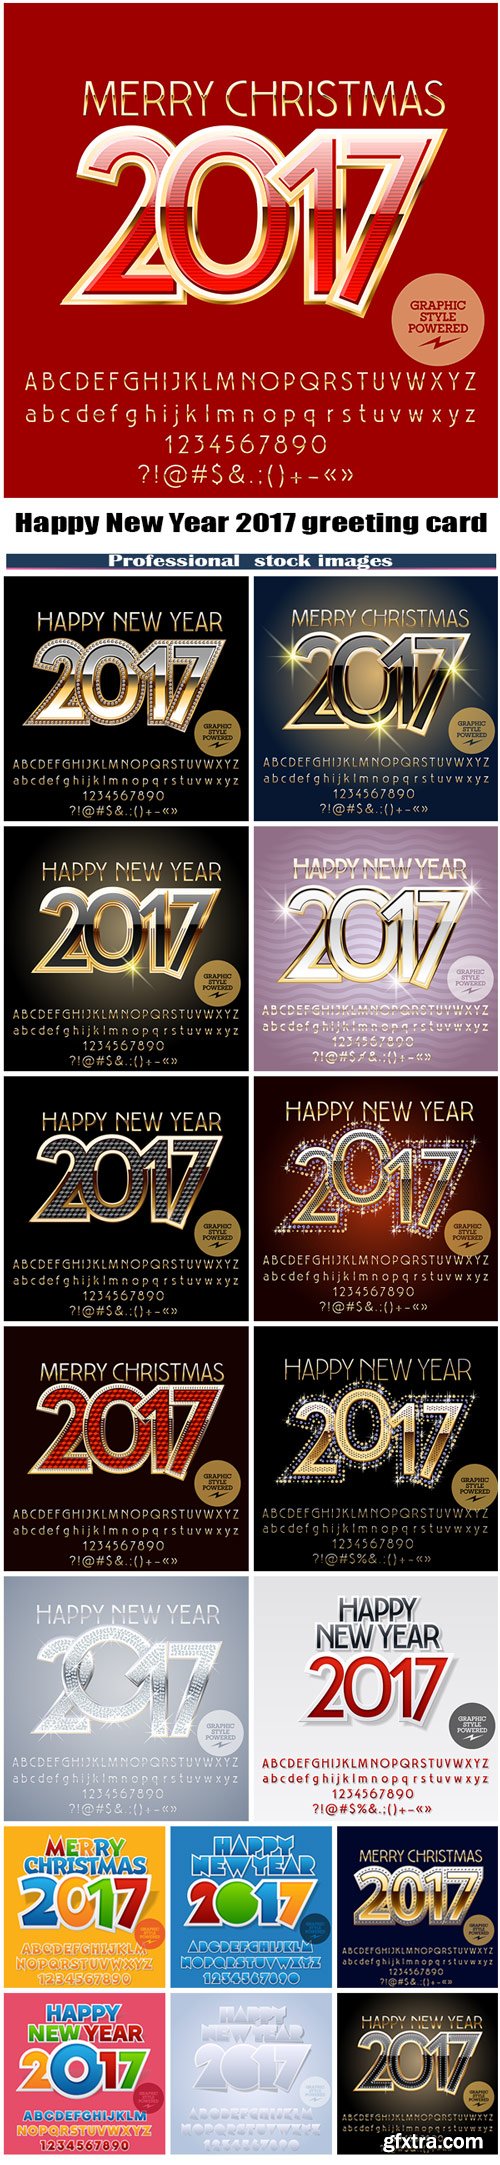 Happy New Year 2017 greeting card with set of letters, symbols and numbers